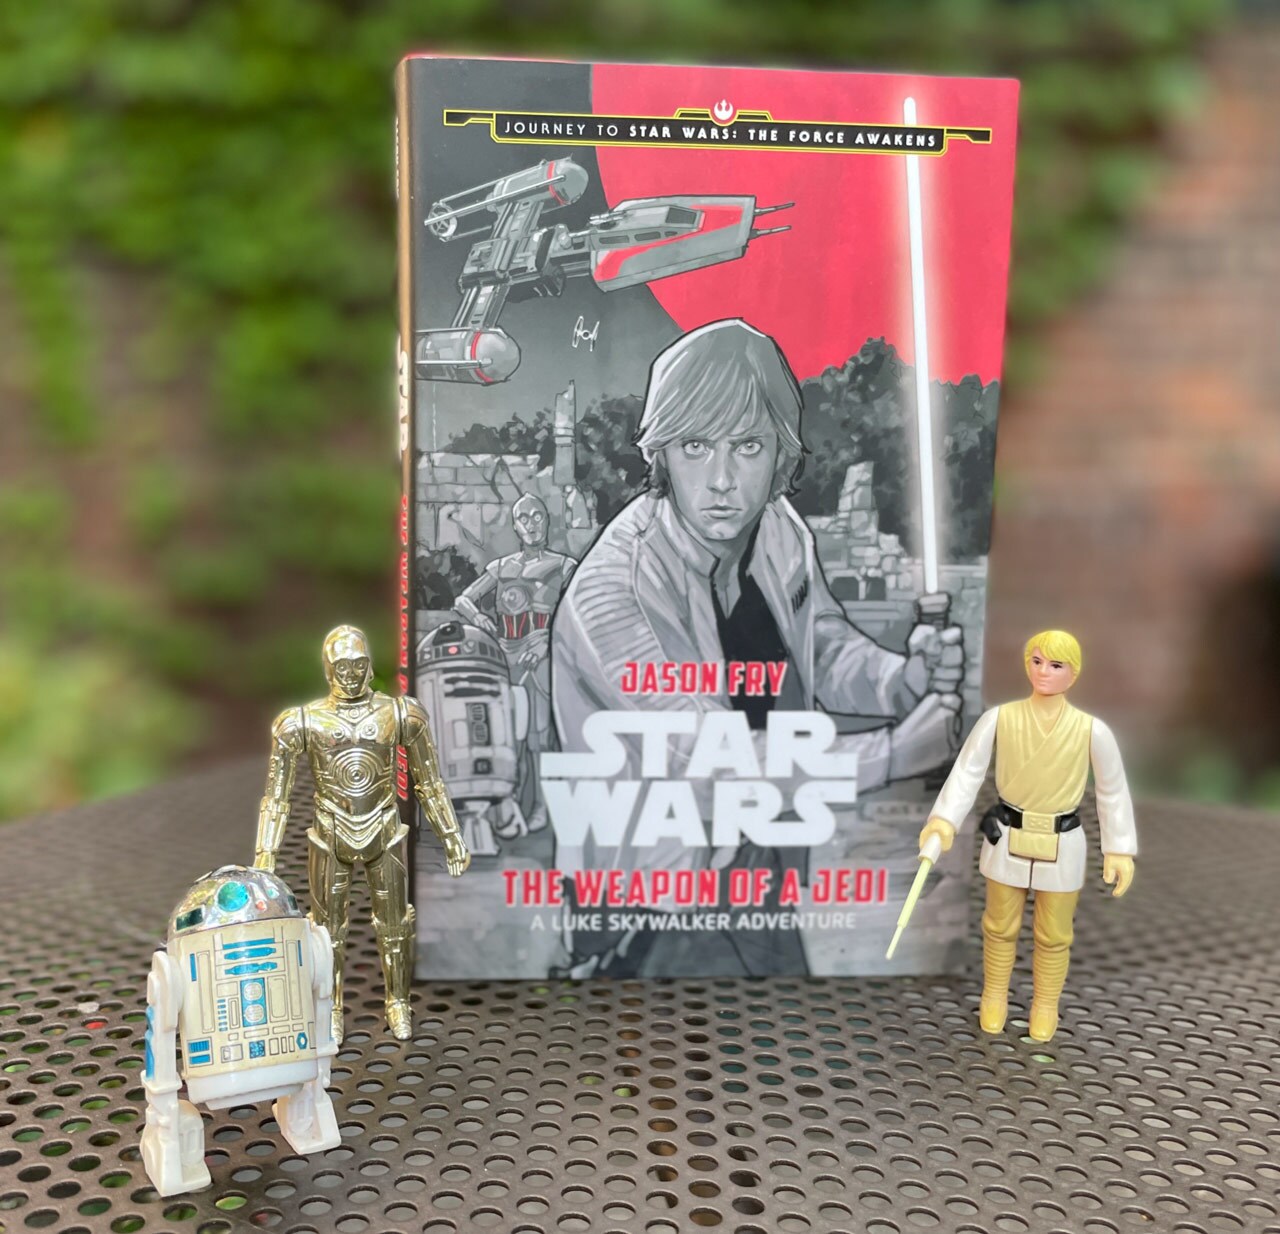 Kenner R2-D2, C-3PO, and Luke Skywalker with the Star Wars: The Weapon of a Jedi book.